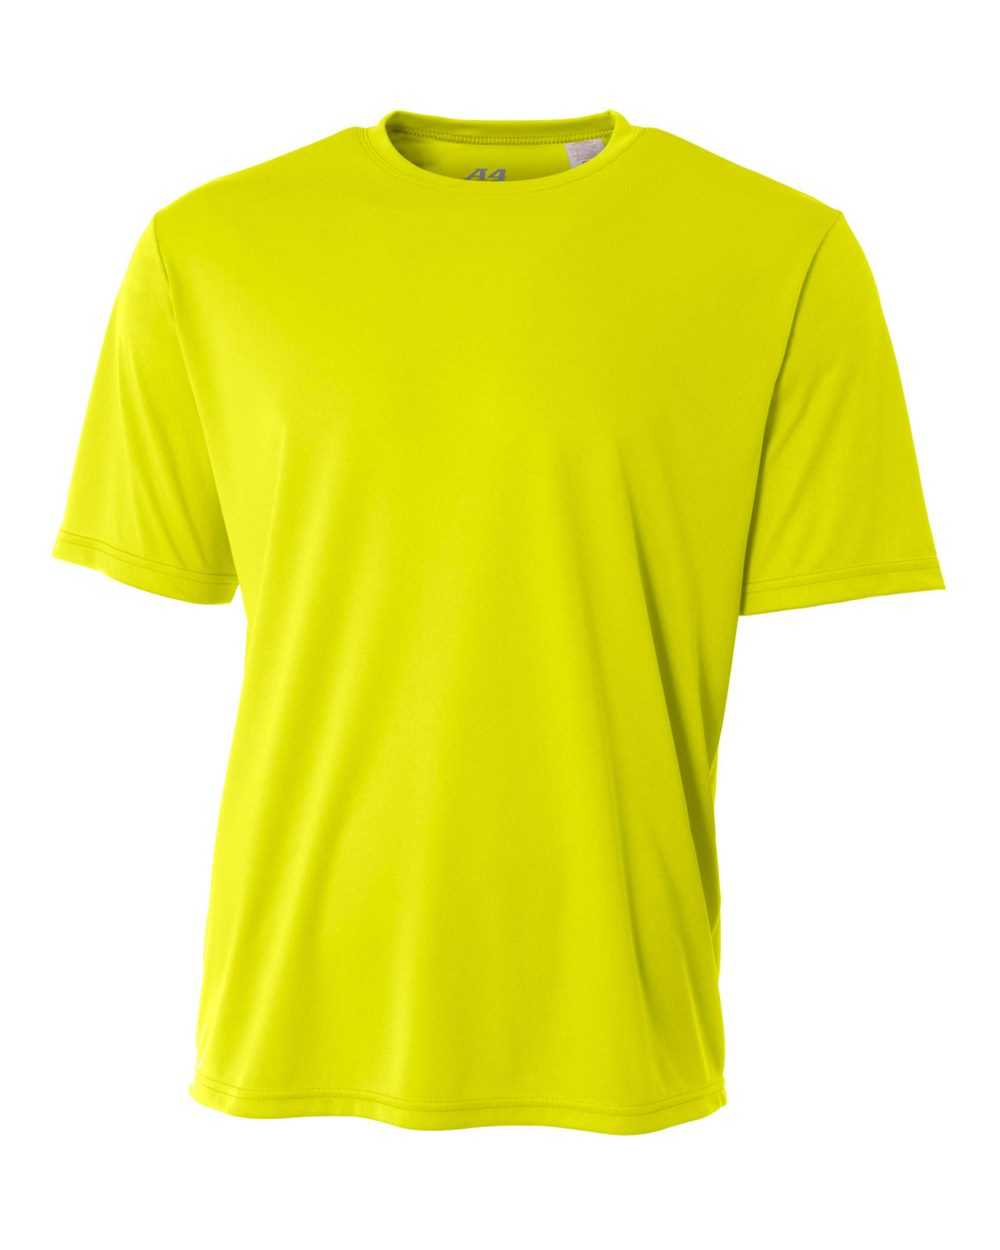 A4 N3142 Cooling Performance Crew - Safety Yellow - HIT a Double